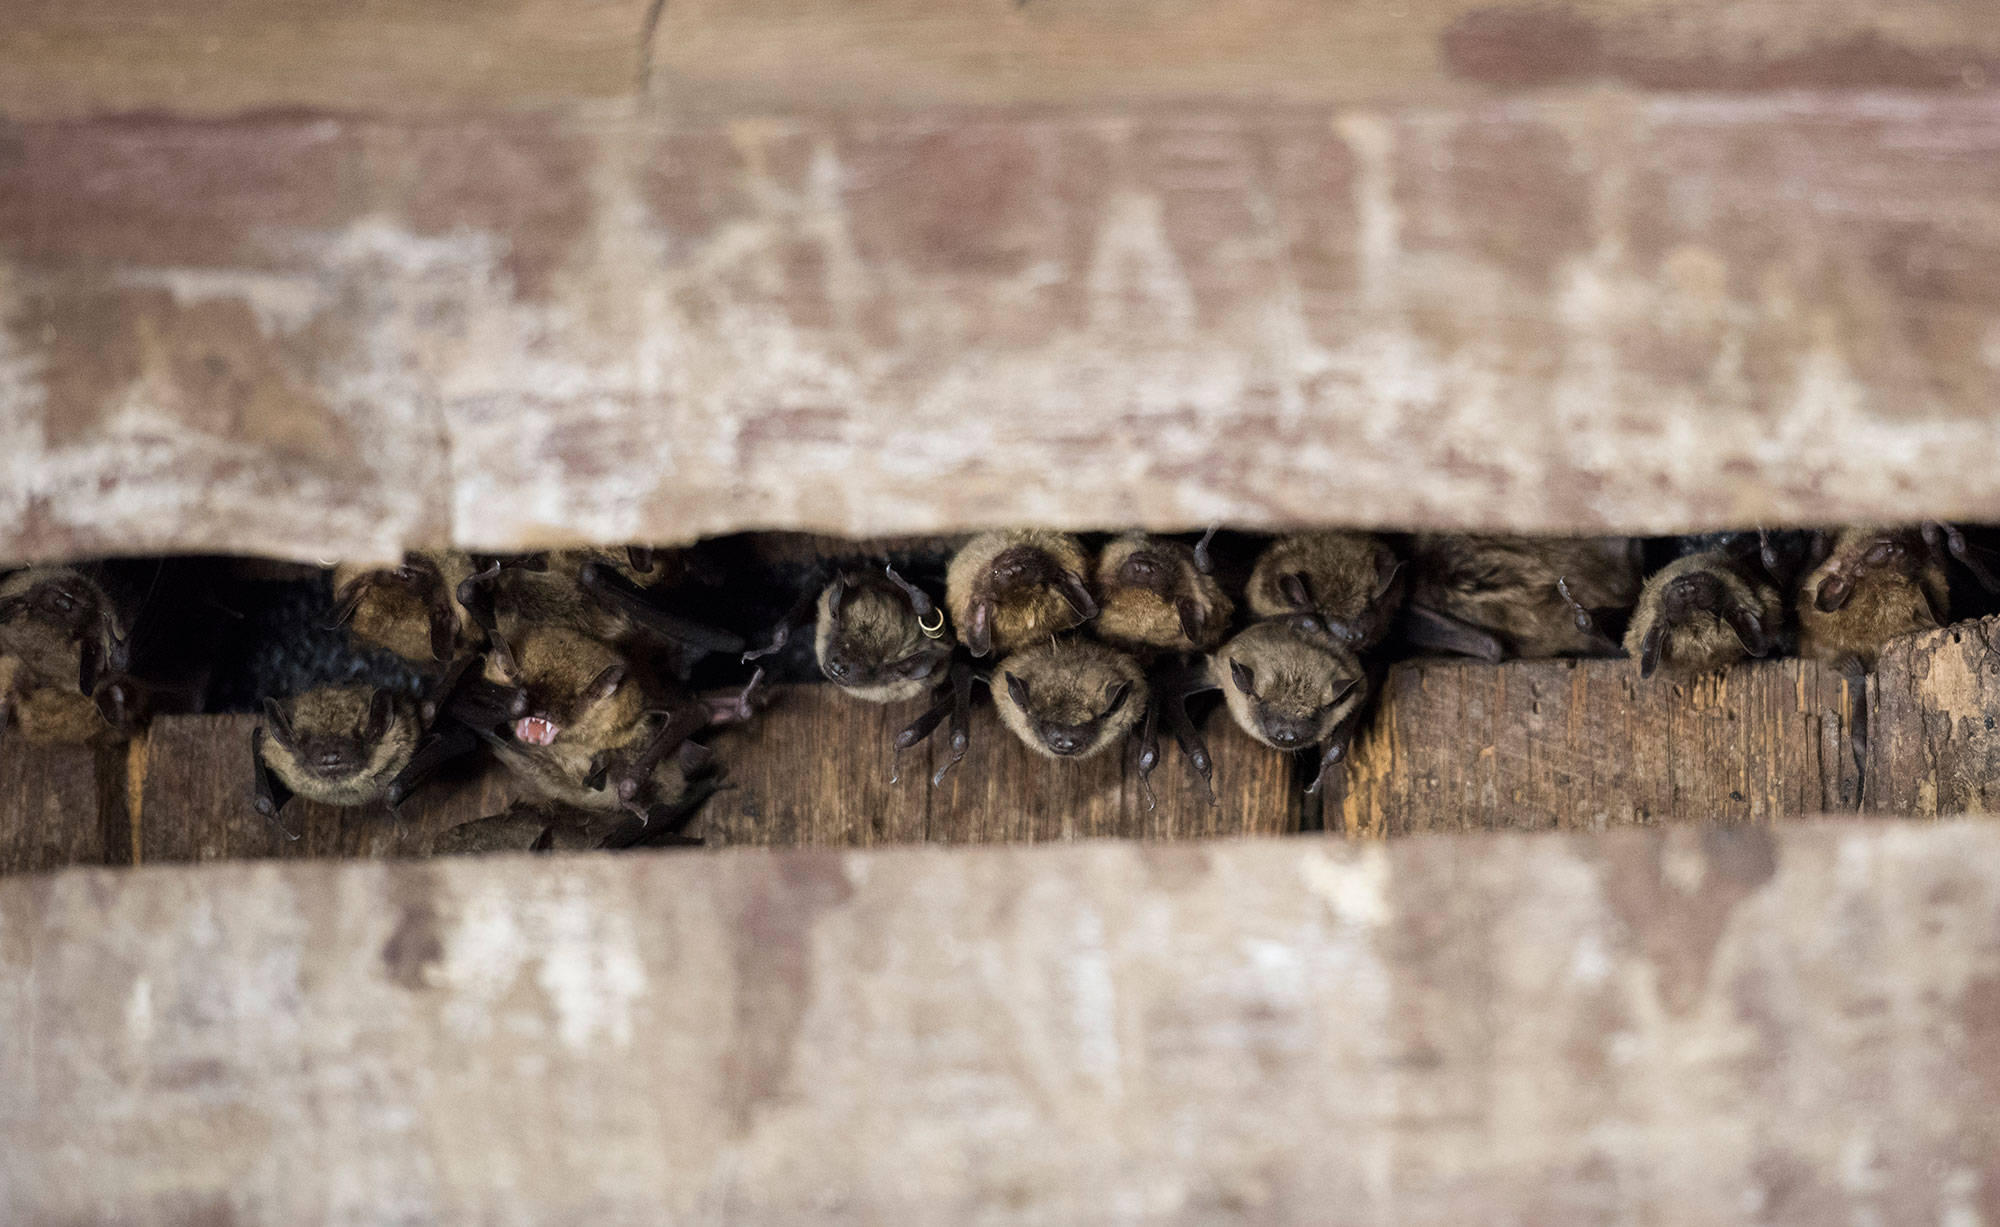 A group of big brown bats roosting in a wooden structure.